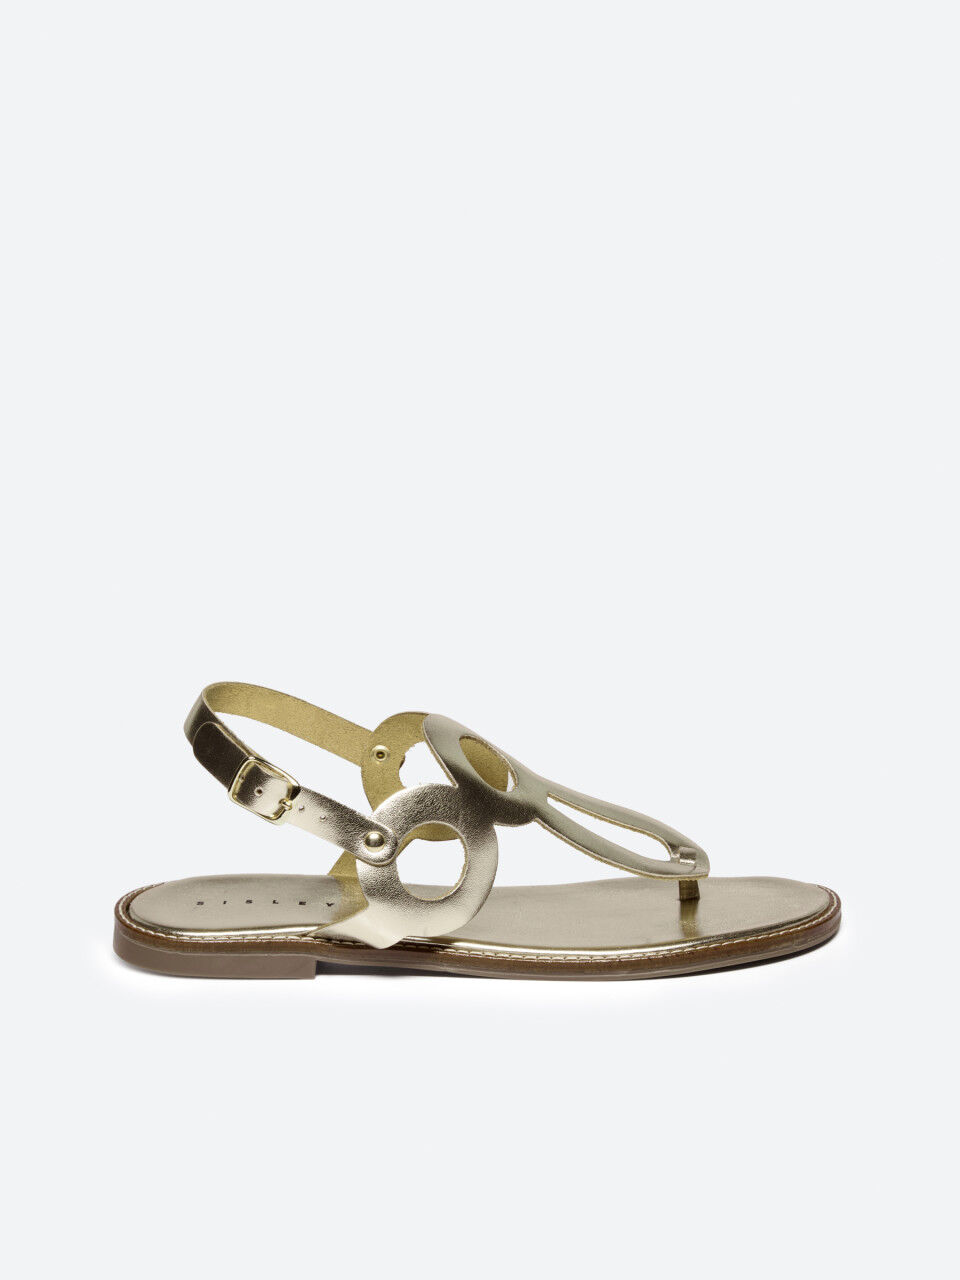 100% leather sandals